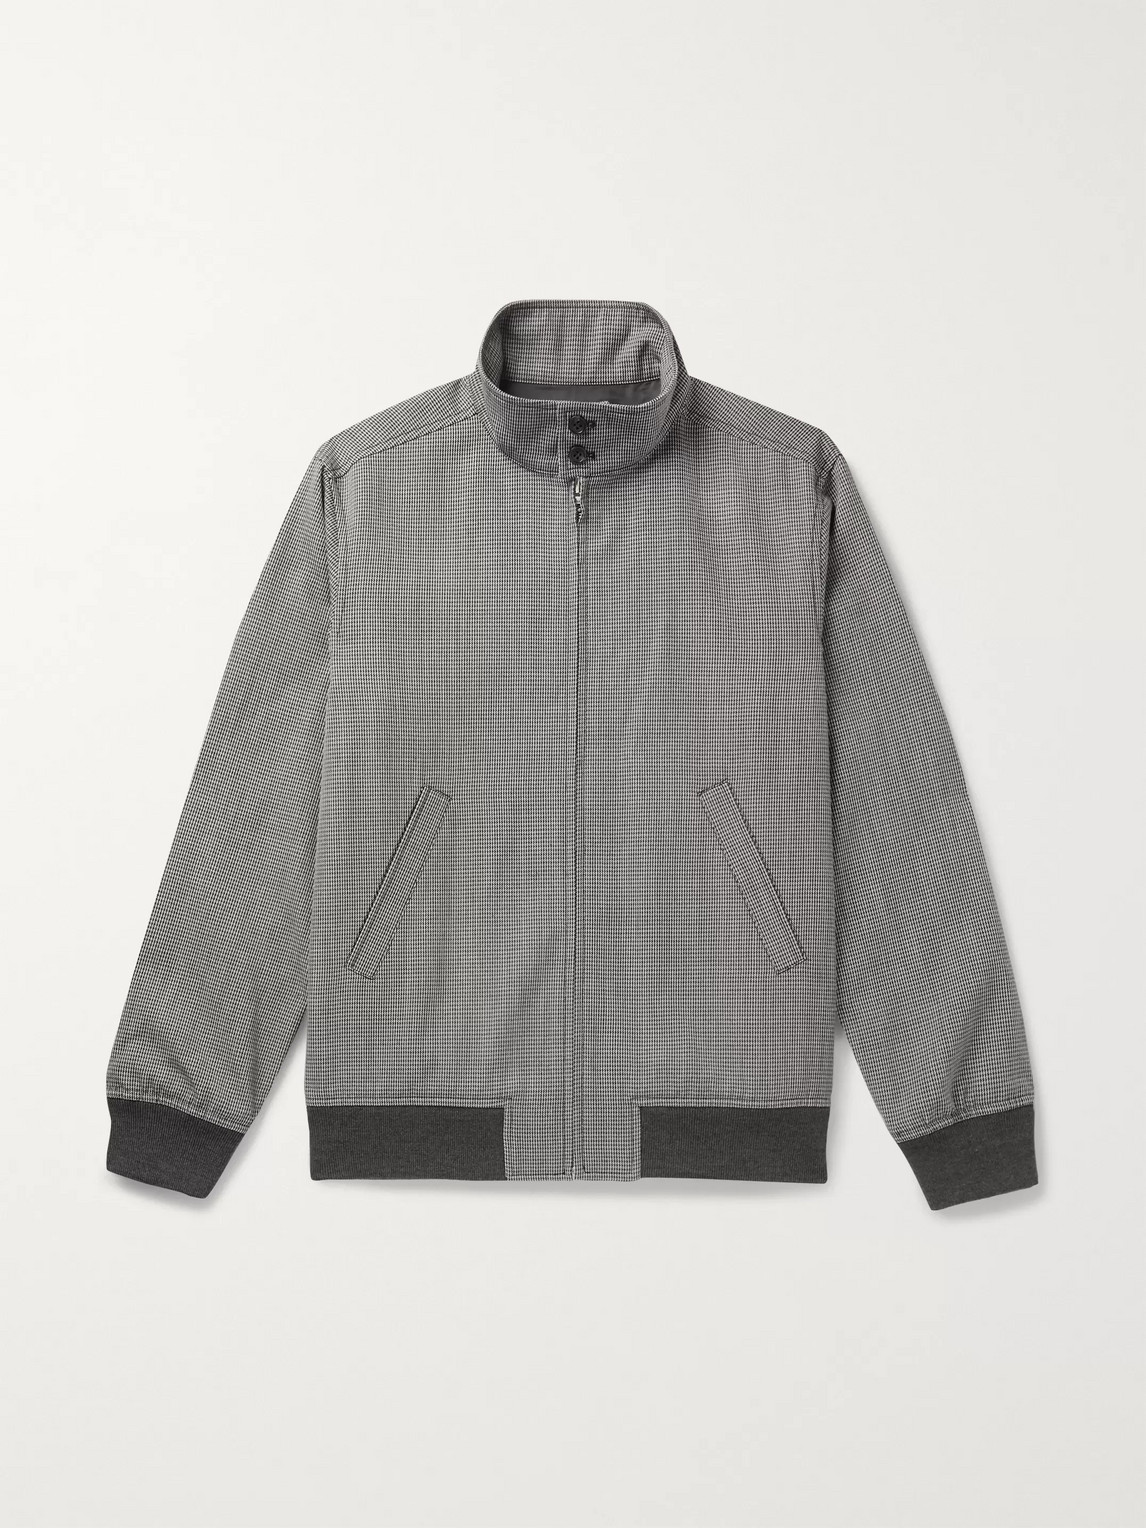 A.P.C. LAUREL HOUNDSTOOTH WOVEN BOMBER JACKET